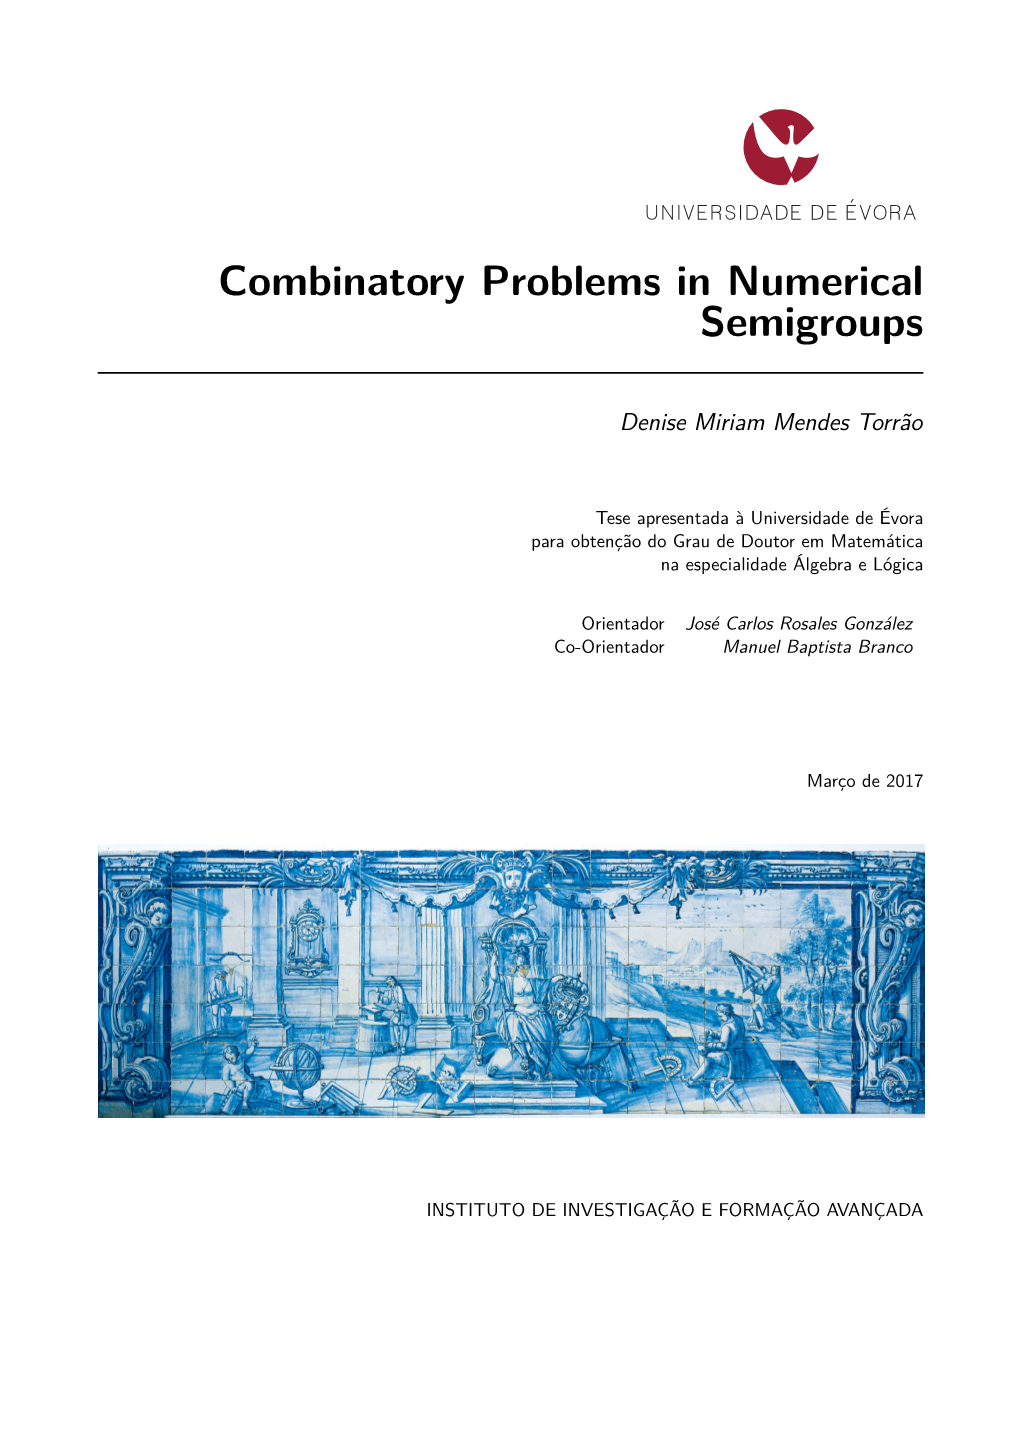 Combinatory Problems in Numerical Semigroups